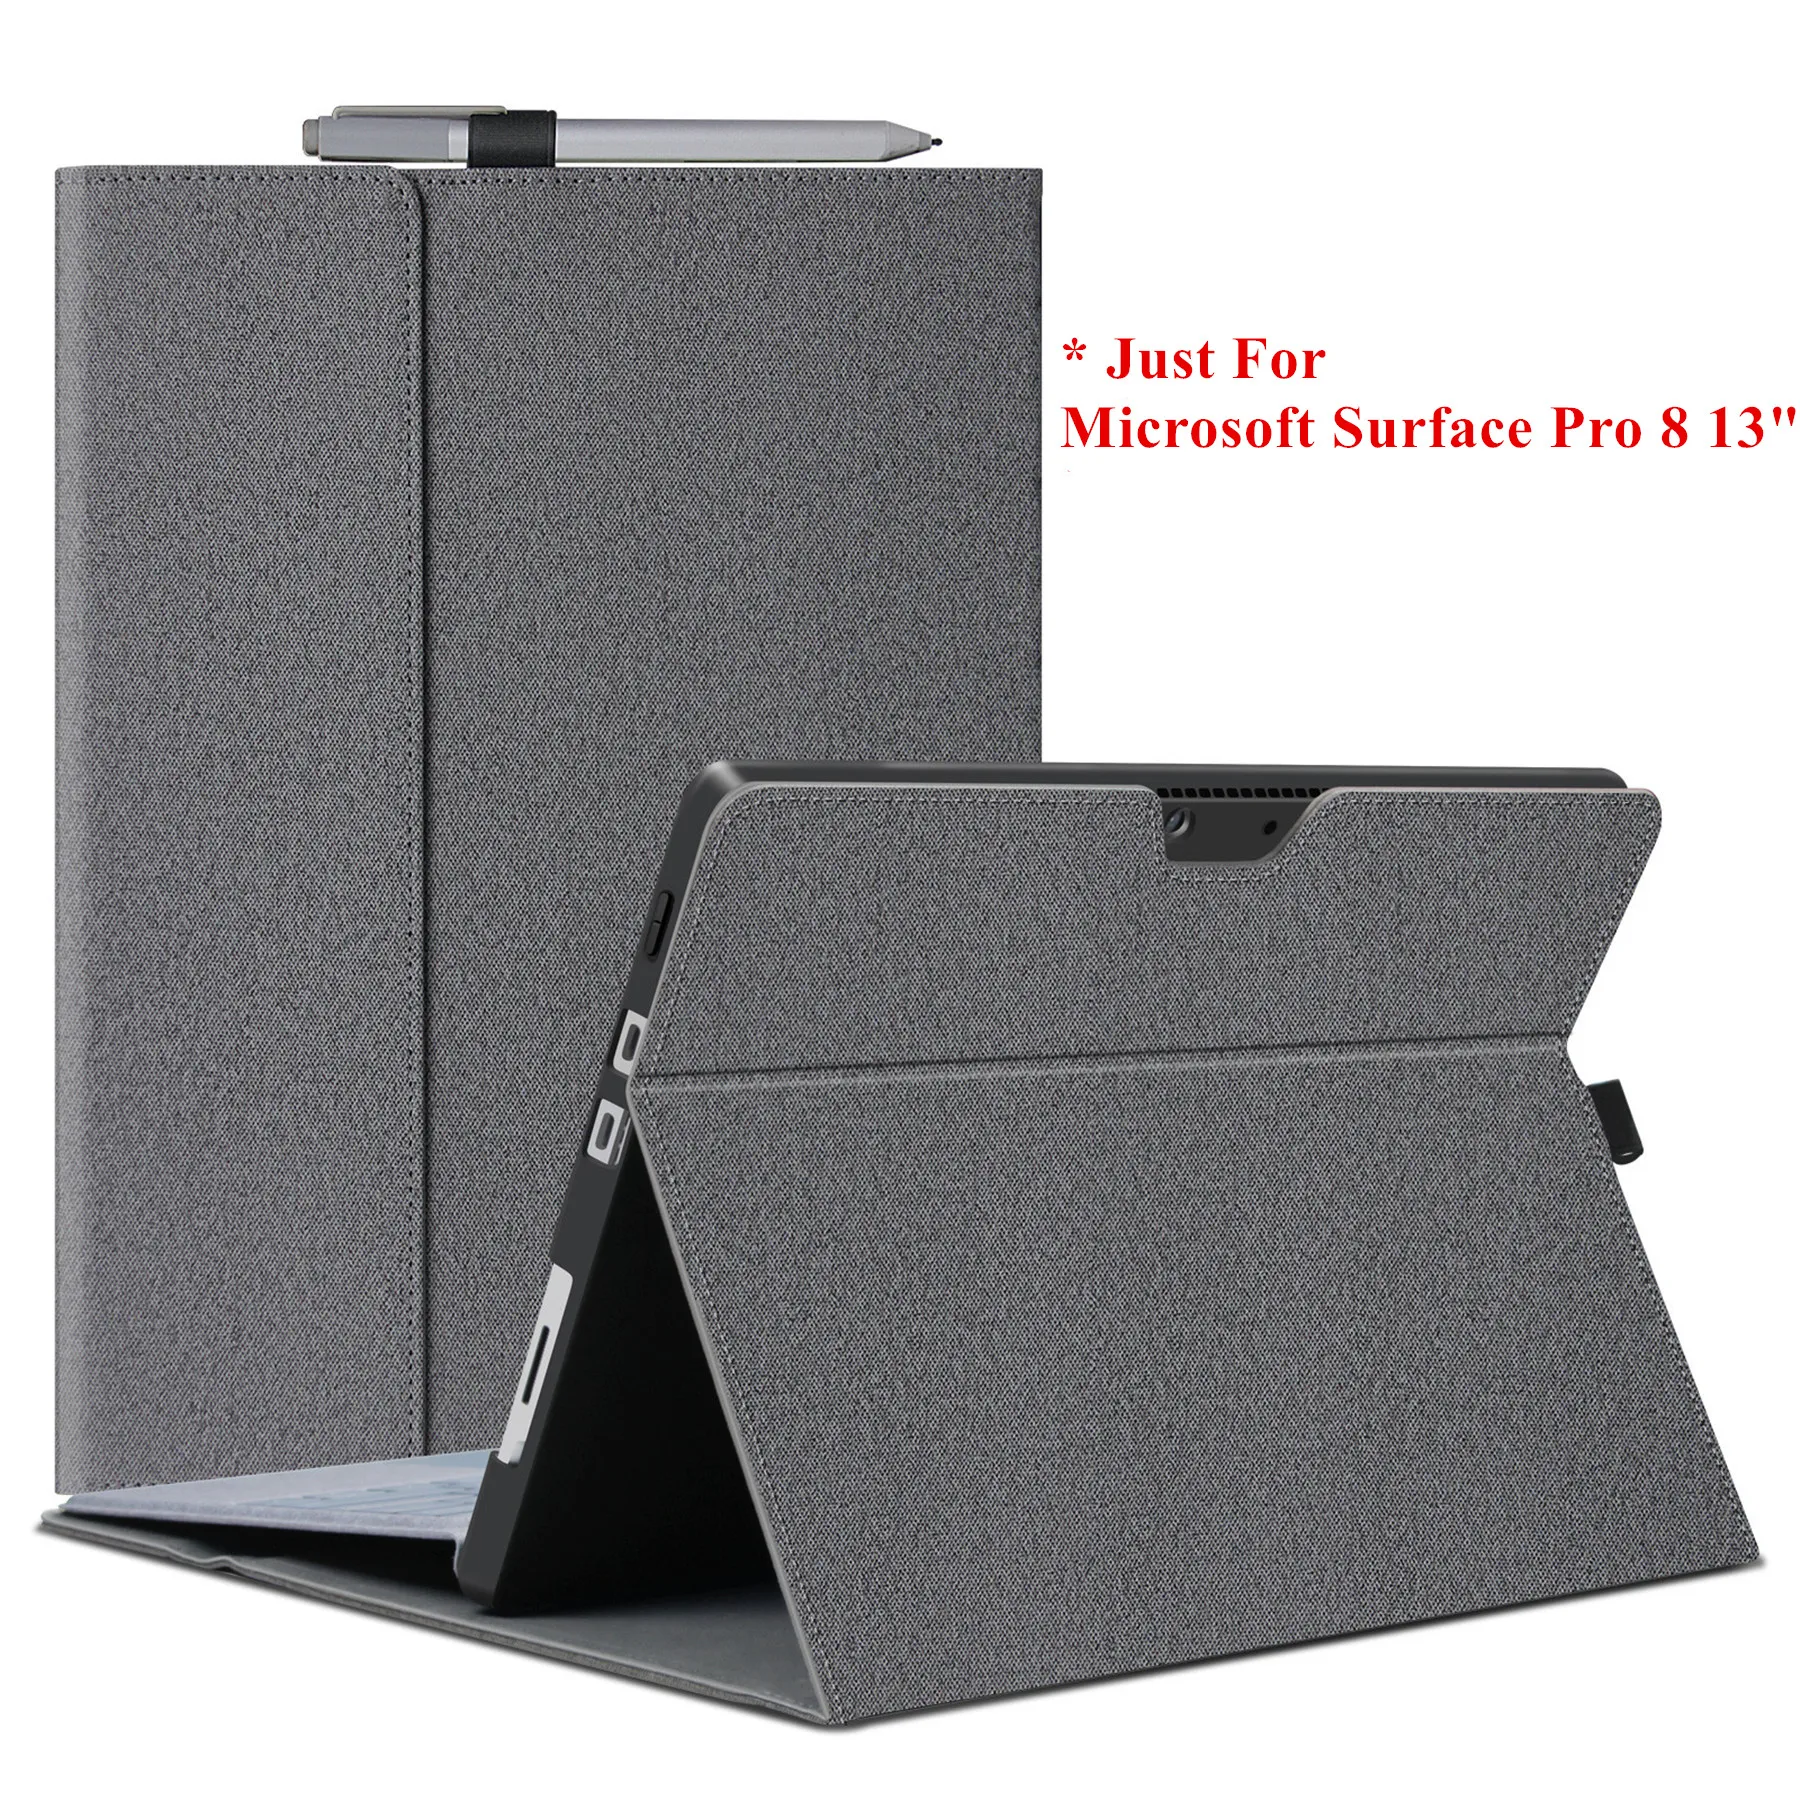 

Megoo Surface Pro 8 Case for with Stylus Holder Multiple Angle Viewing FolioCase Cover for Microsoft Surface Pro 8 13inch